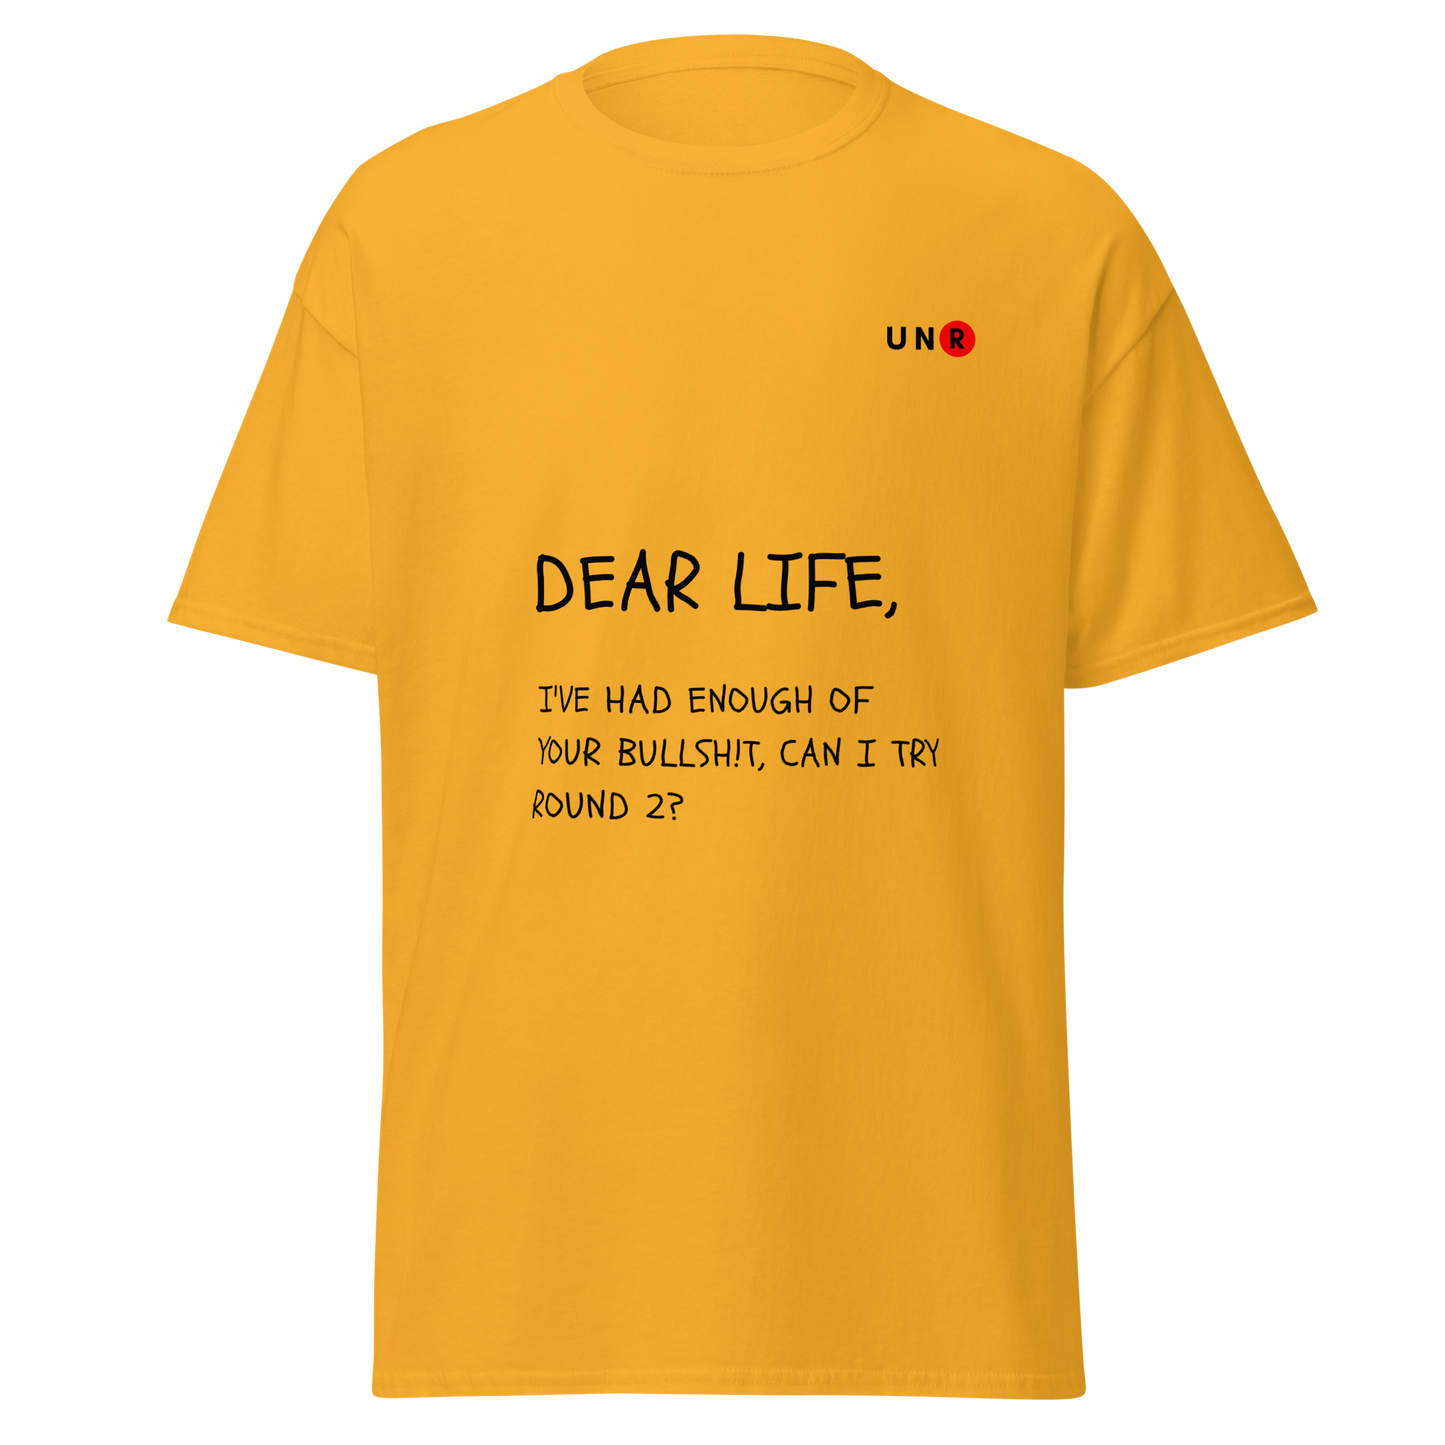 Dear Life, I've had enough of your... T-shirt